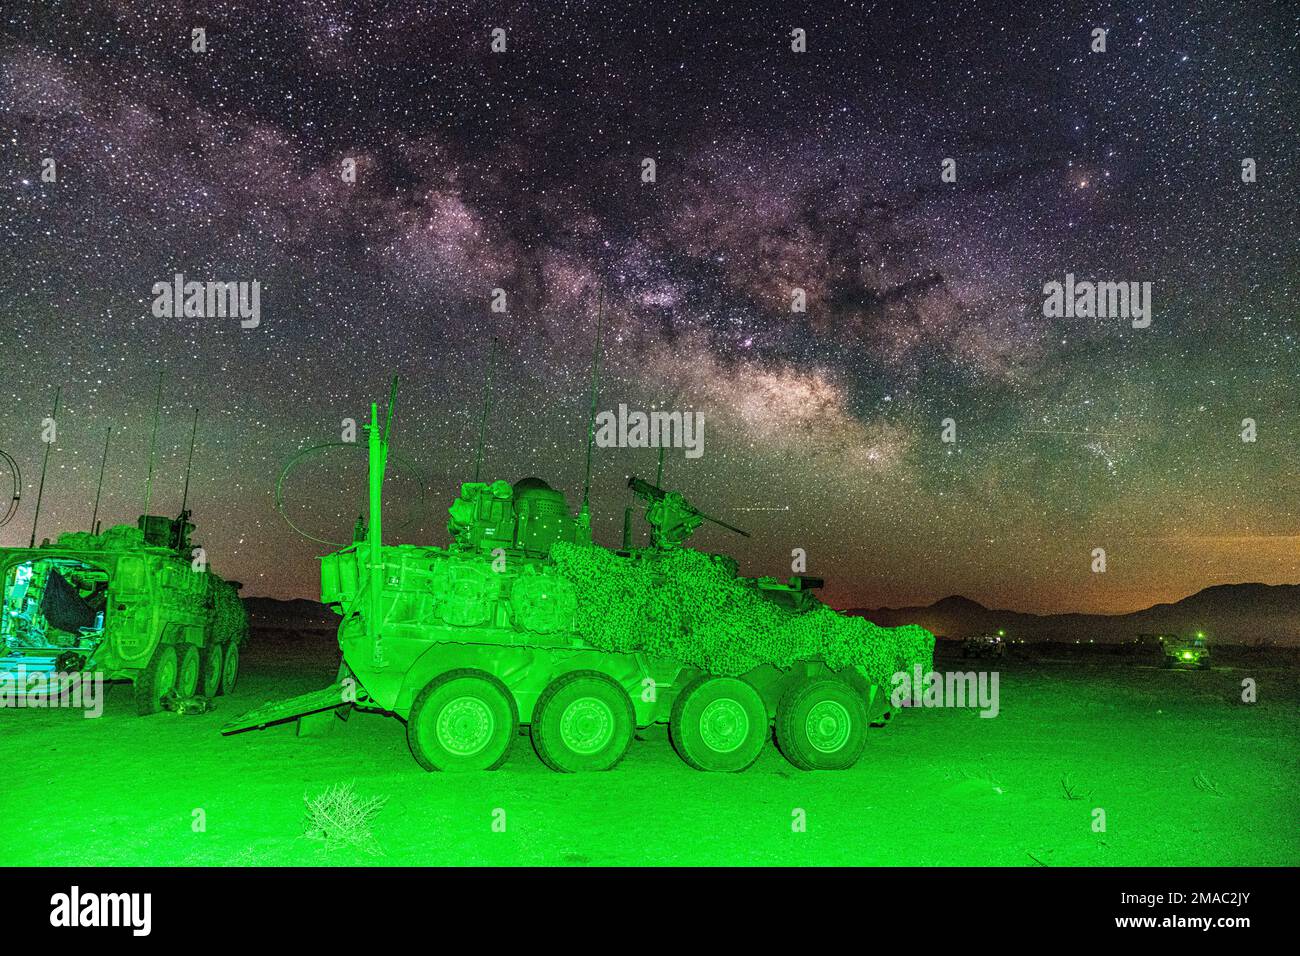 A U.S. Army Stryker assigned to Col. Kevin Bradley, commander of 3d Cavalry Regiment, is parked at a remote location of the National Training Center during a moonless, open sky where the milky way was visible May 24, 2022. Additionally, unmanned aircraft circled the vicinity to monitor for threats and intelligence from the sky. Stock Photo